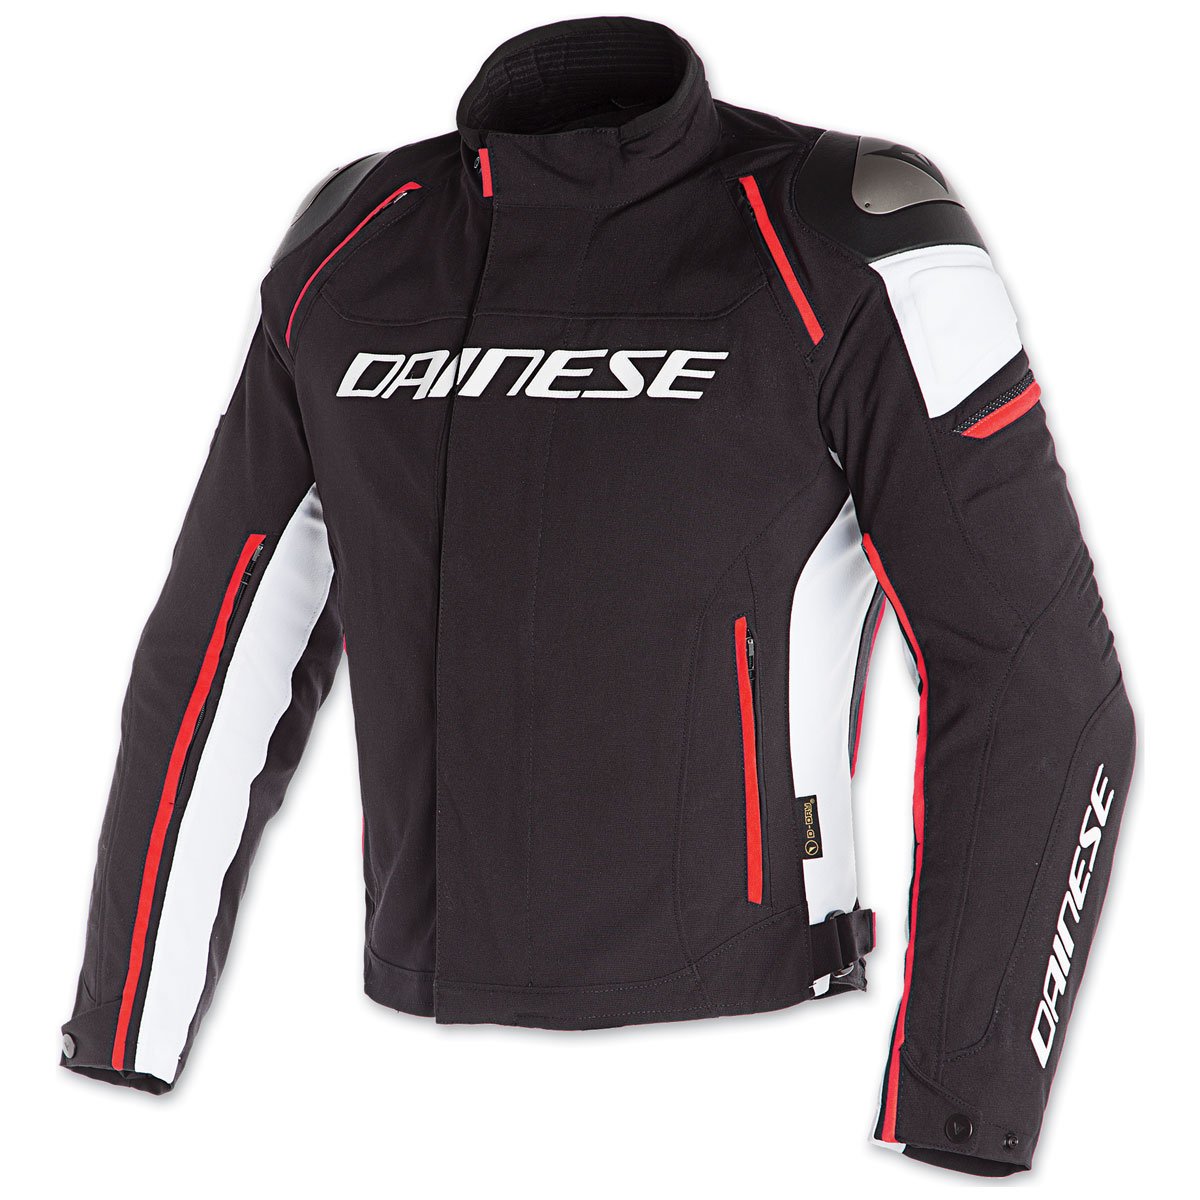 Image of Dainese Racing 3 D-Dry Jacket Black White Fluo Red Size 48 ID 8052644795936